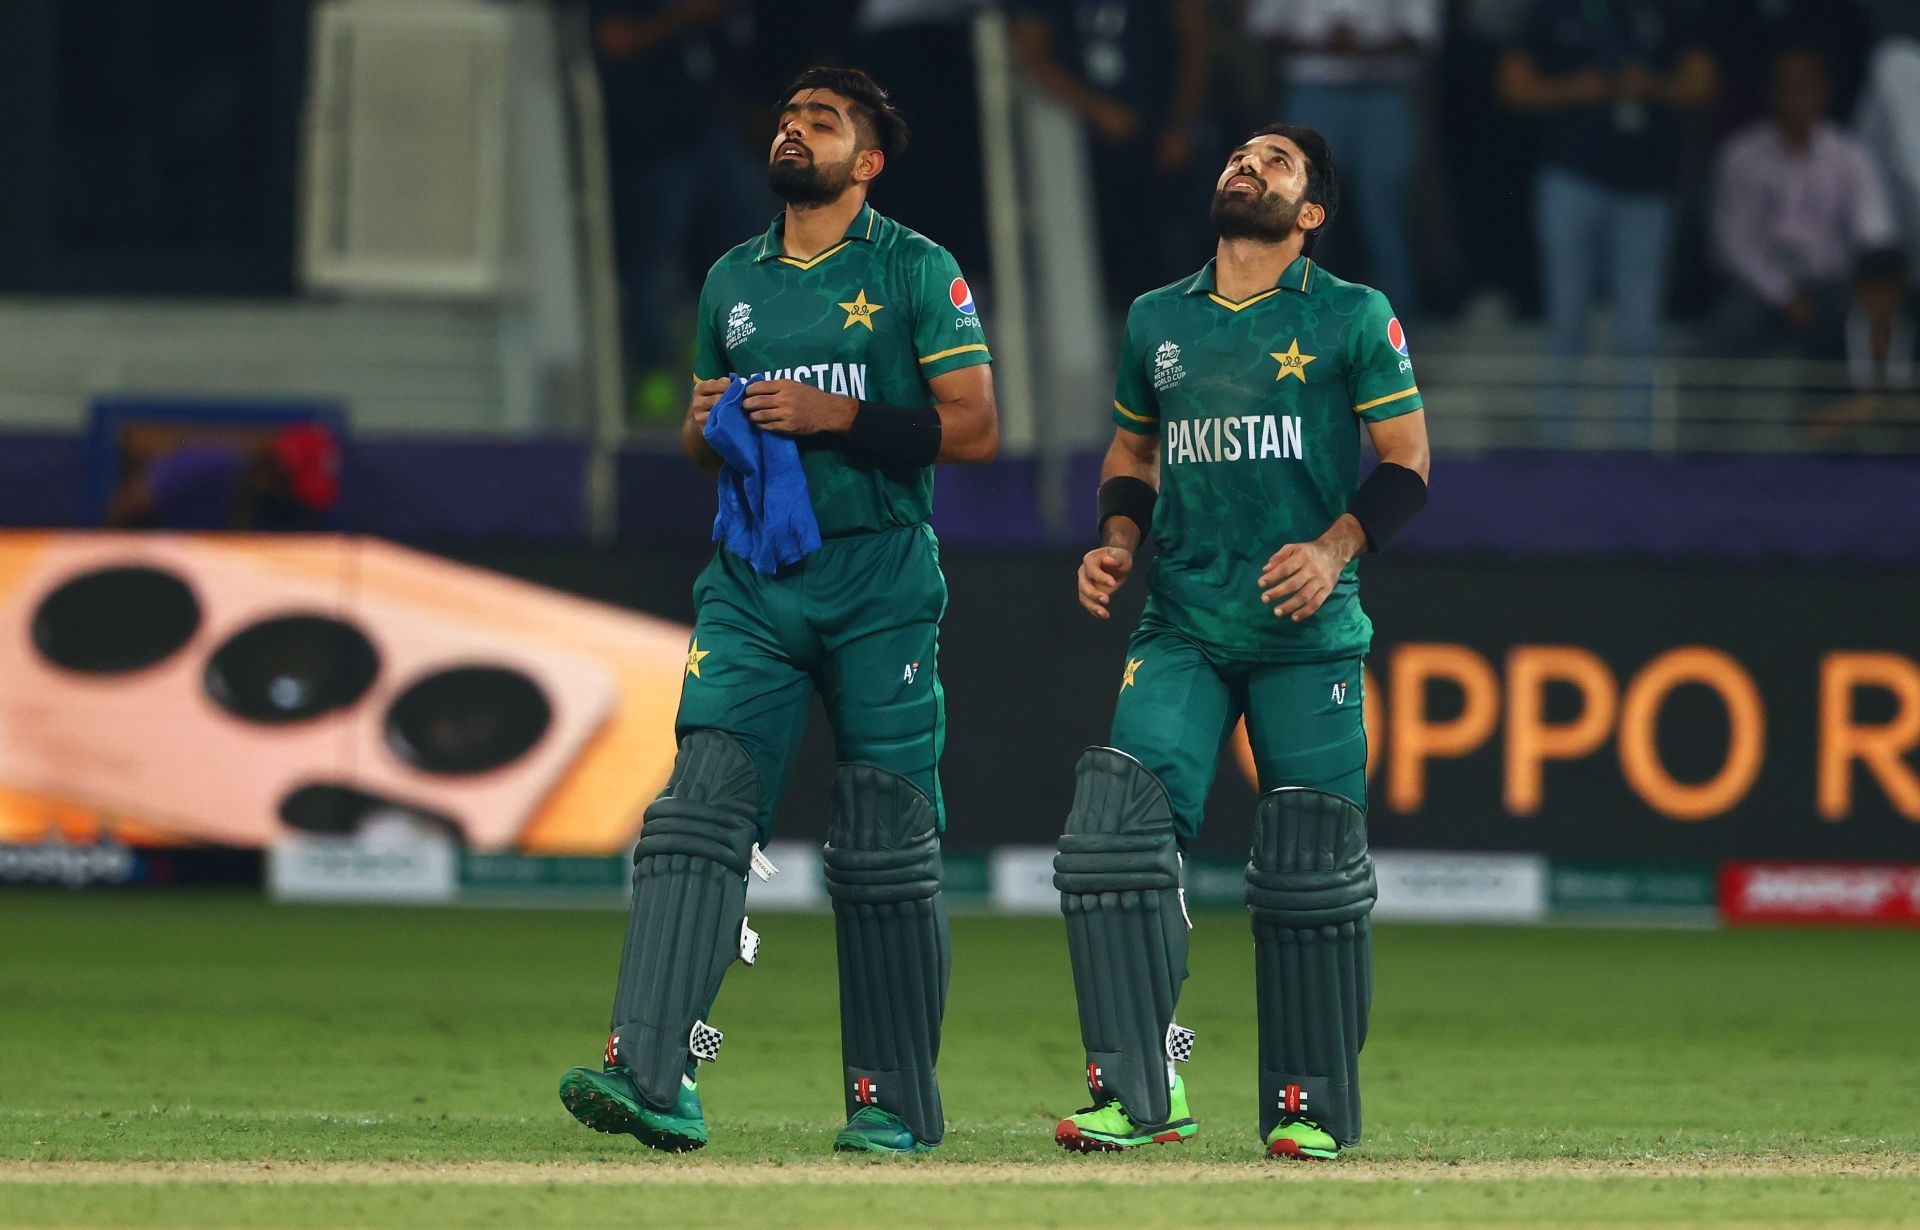 Aakash Chopra expects Babar Azam and Mohammad Rizwan to continue with their good form